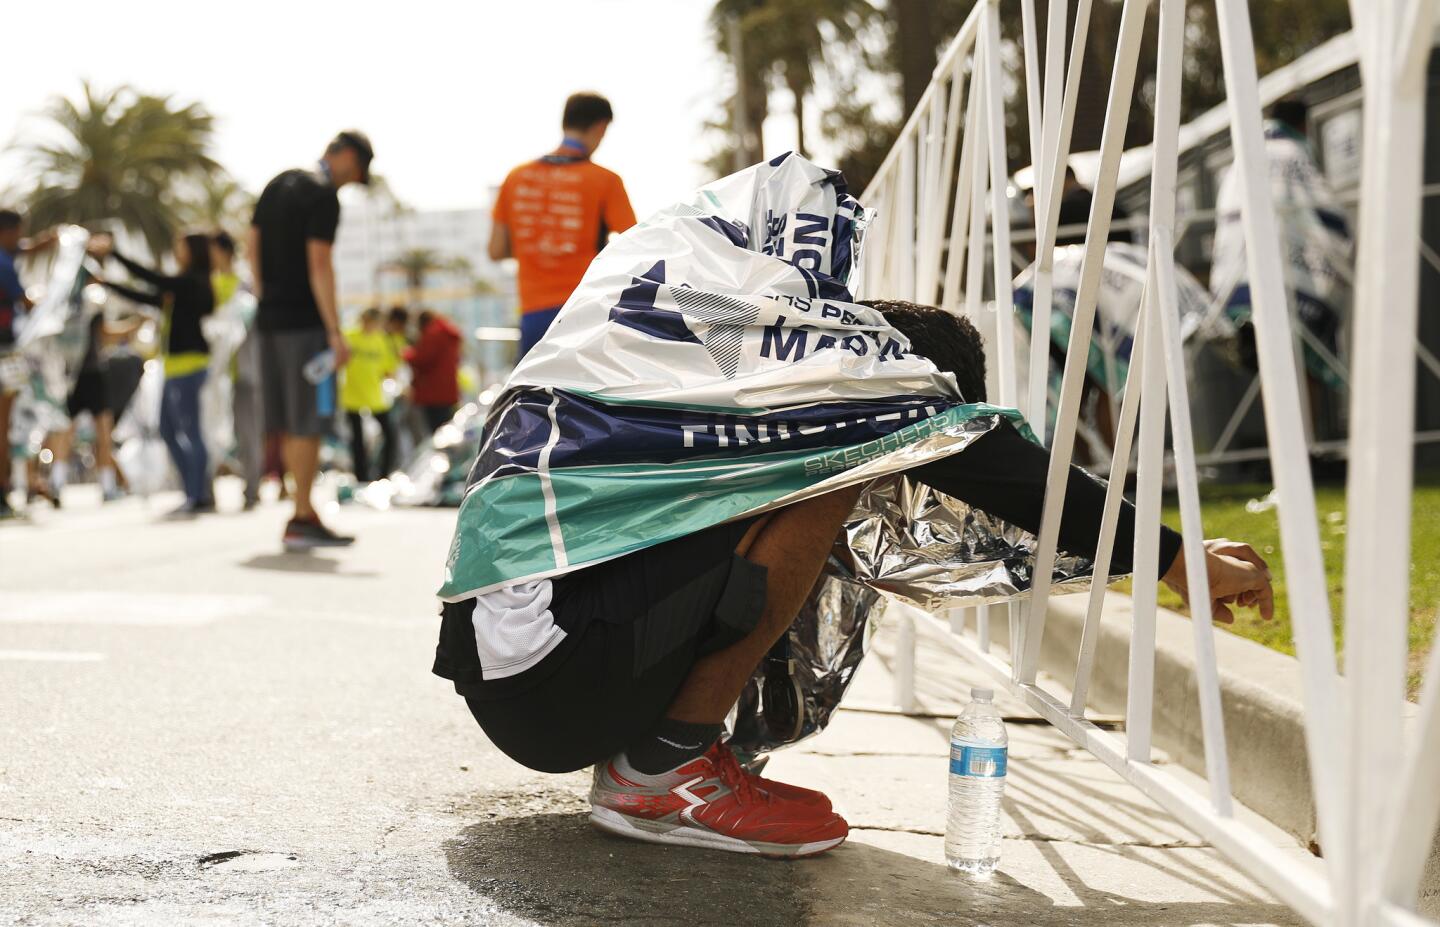 Race participant Horacio Gonzalez, 42, of Los Angeles, stretches after finishing the L.A. Marathon on Sunday.